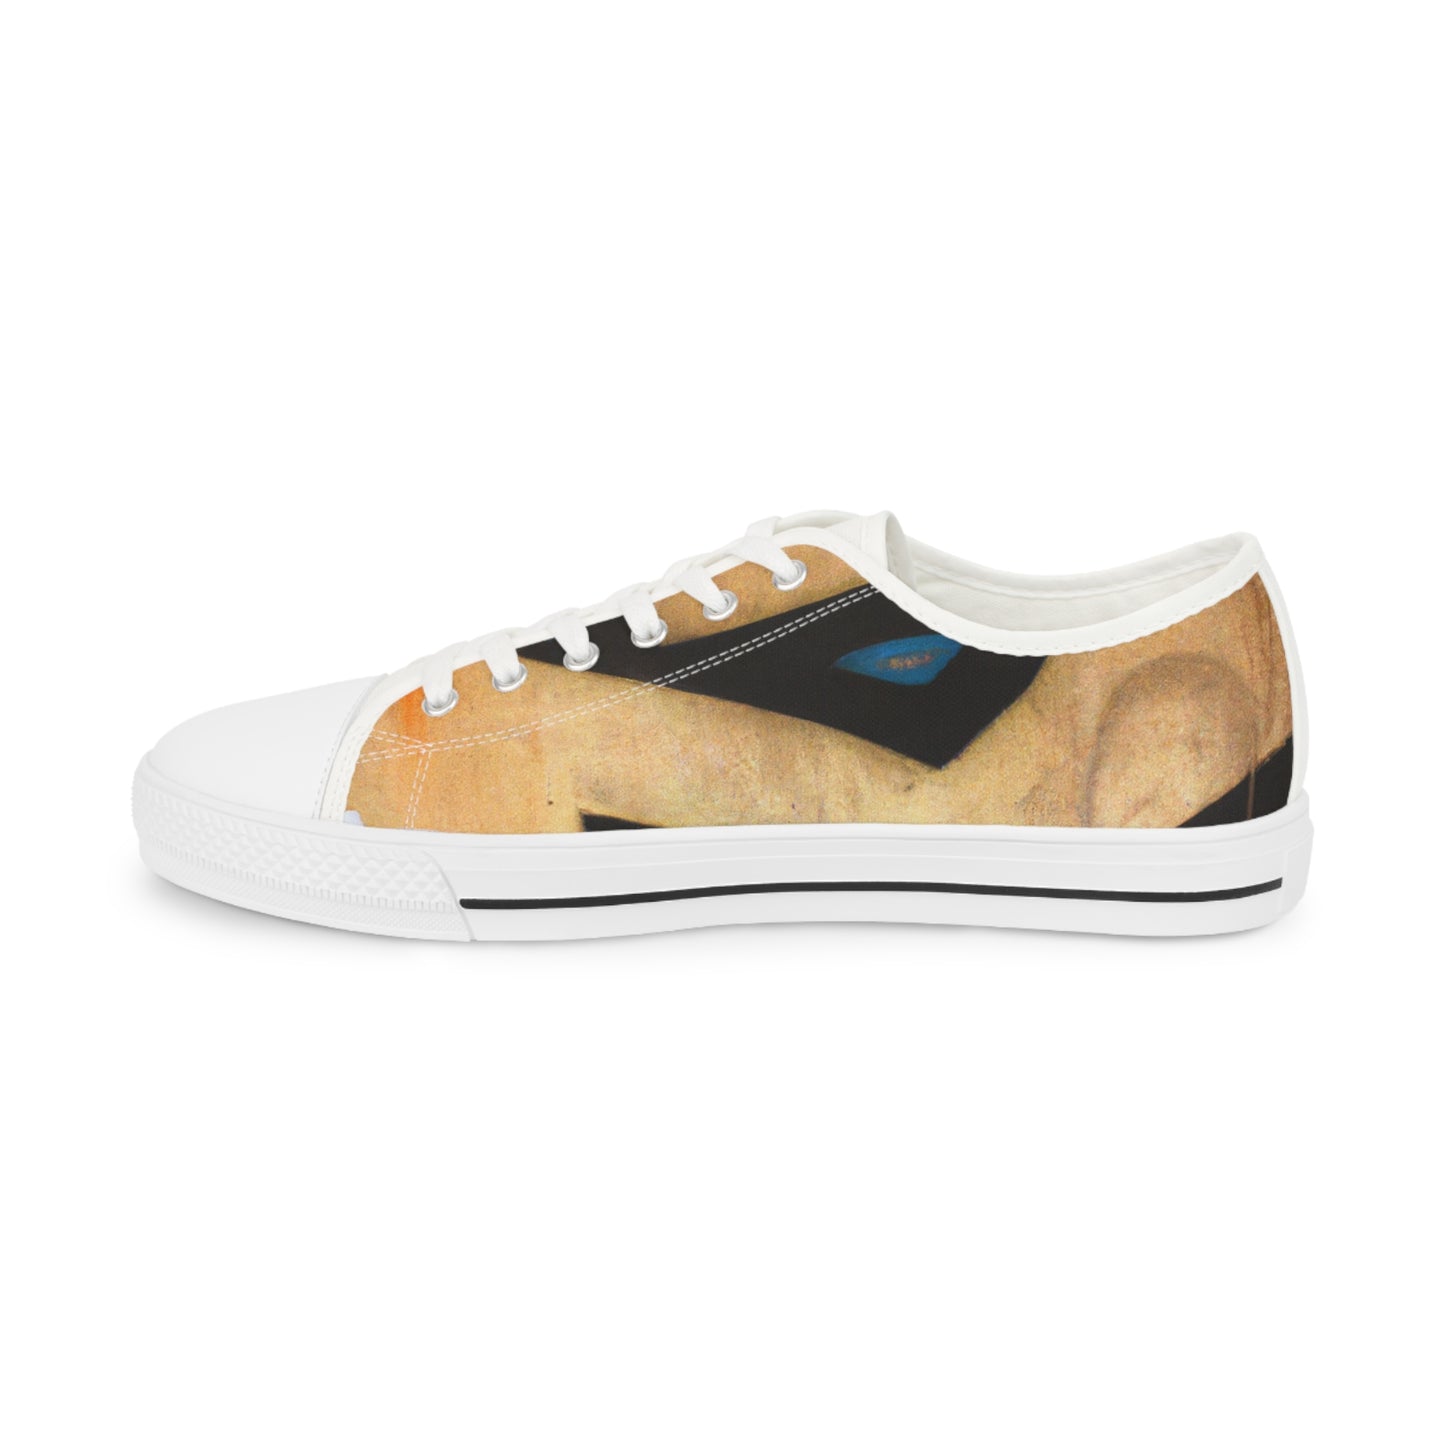 Ivy Prudence Sloane - Low Top Shoes